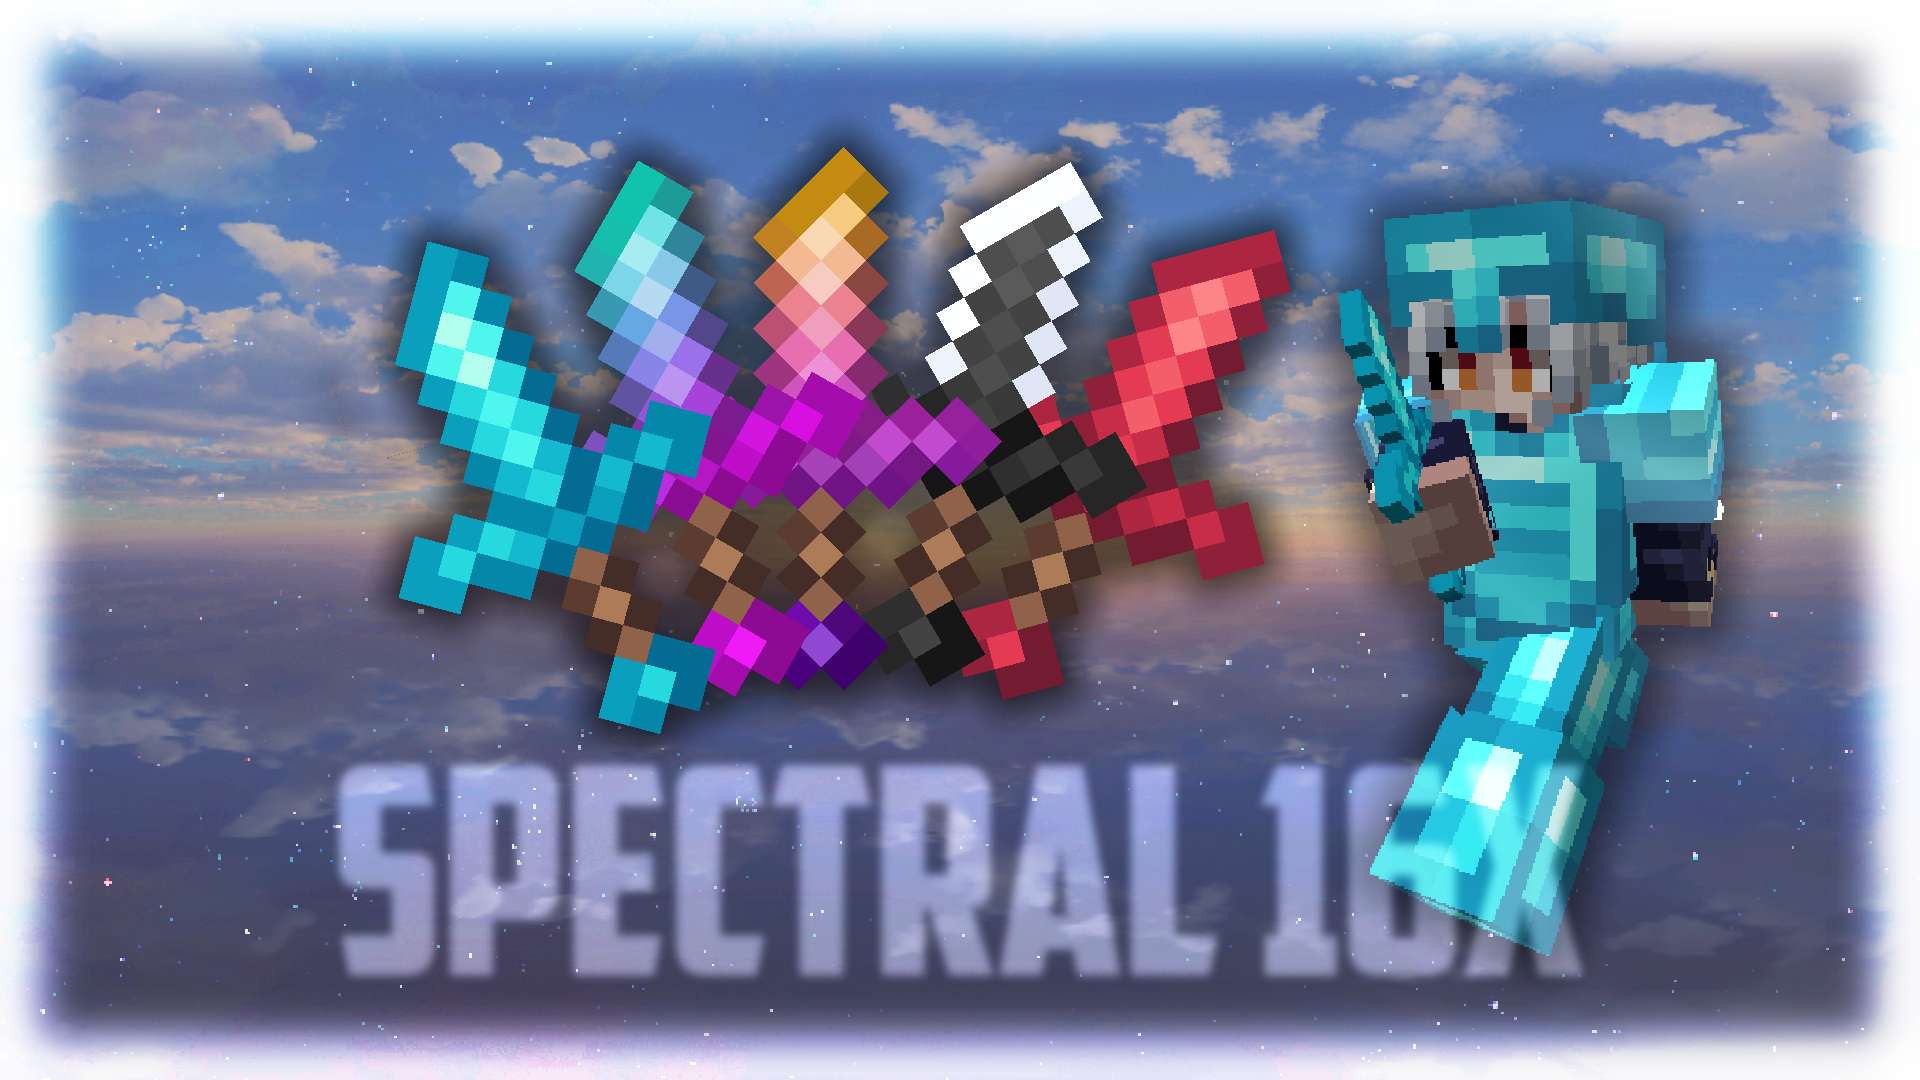 Spectral - Jade 16 by Zlax on PvPRP